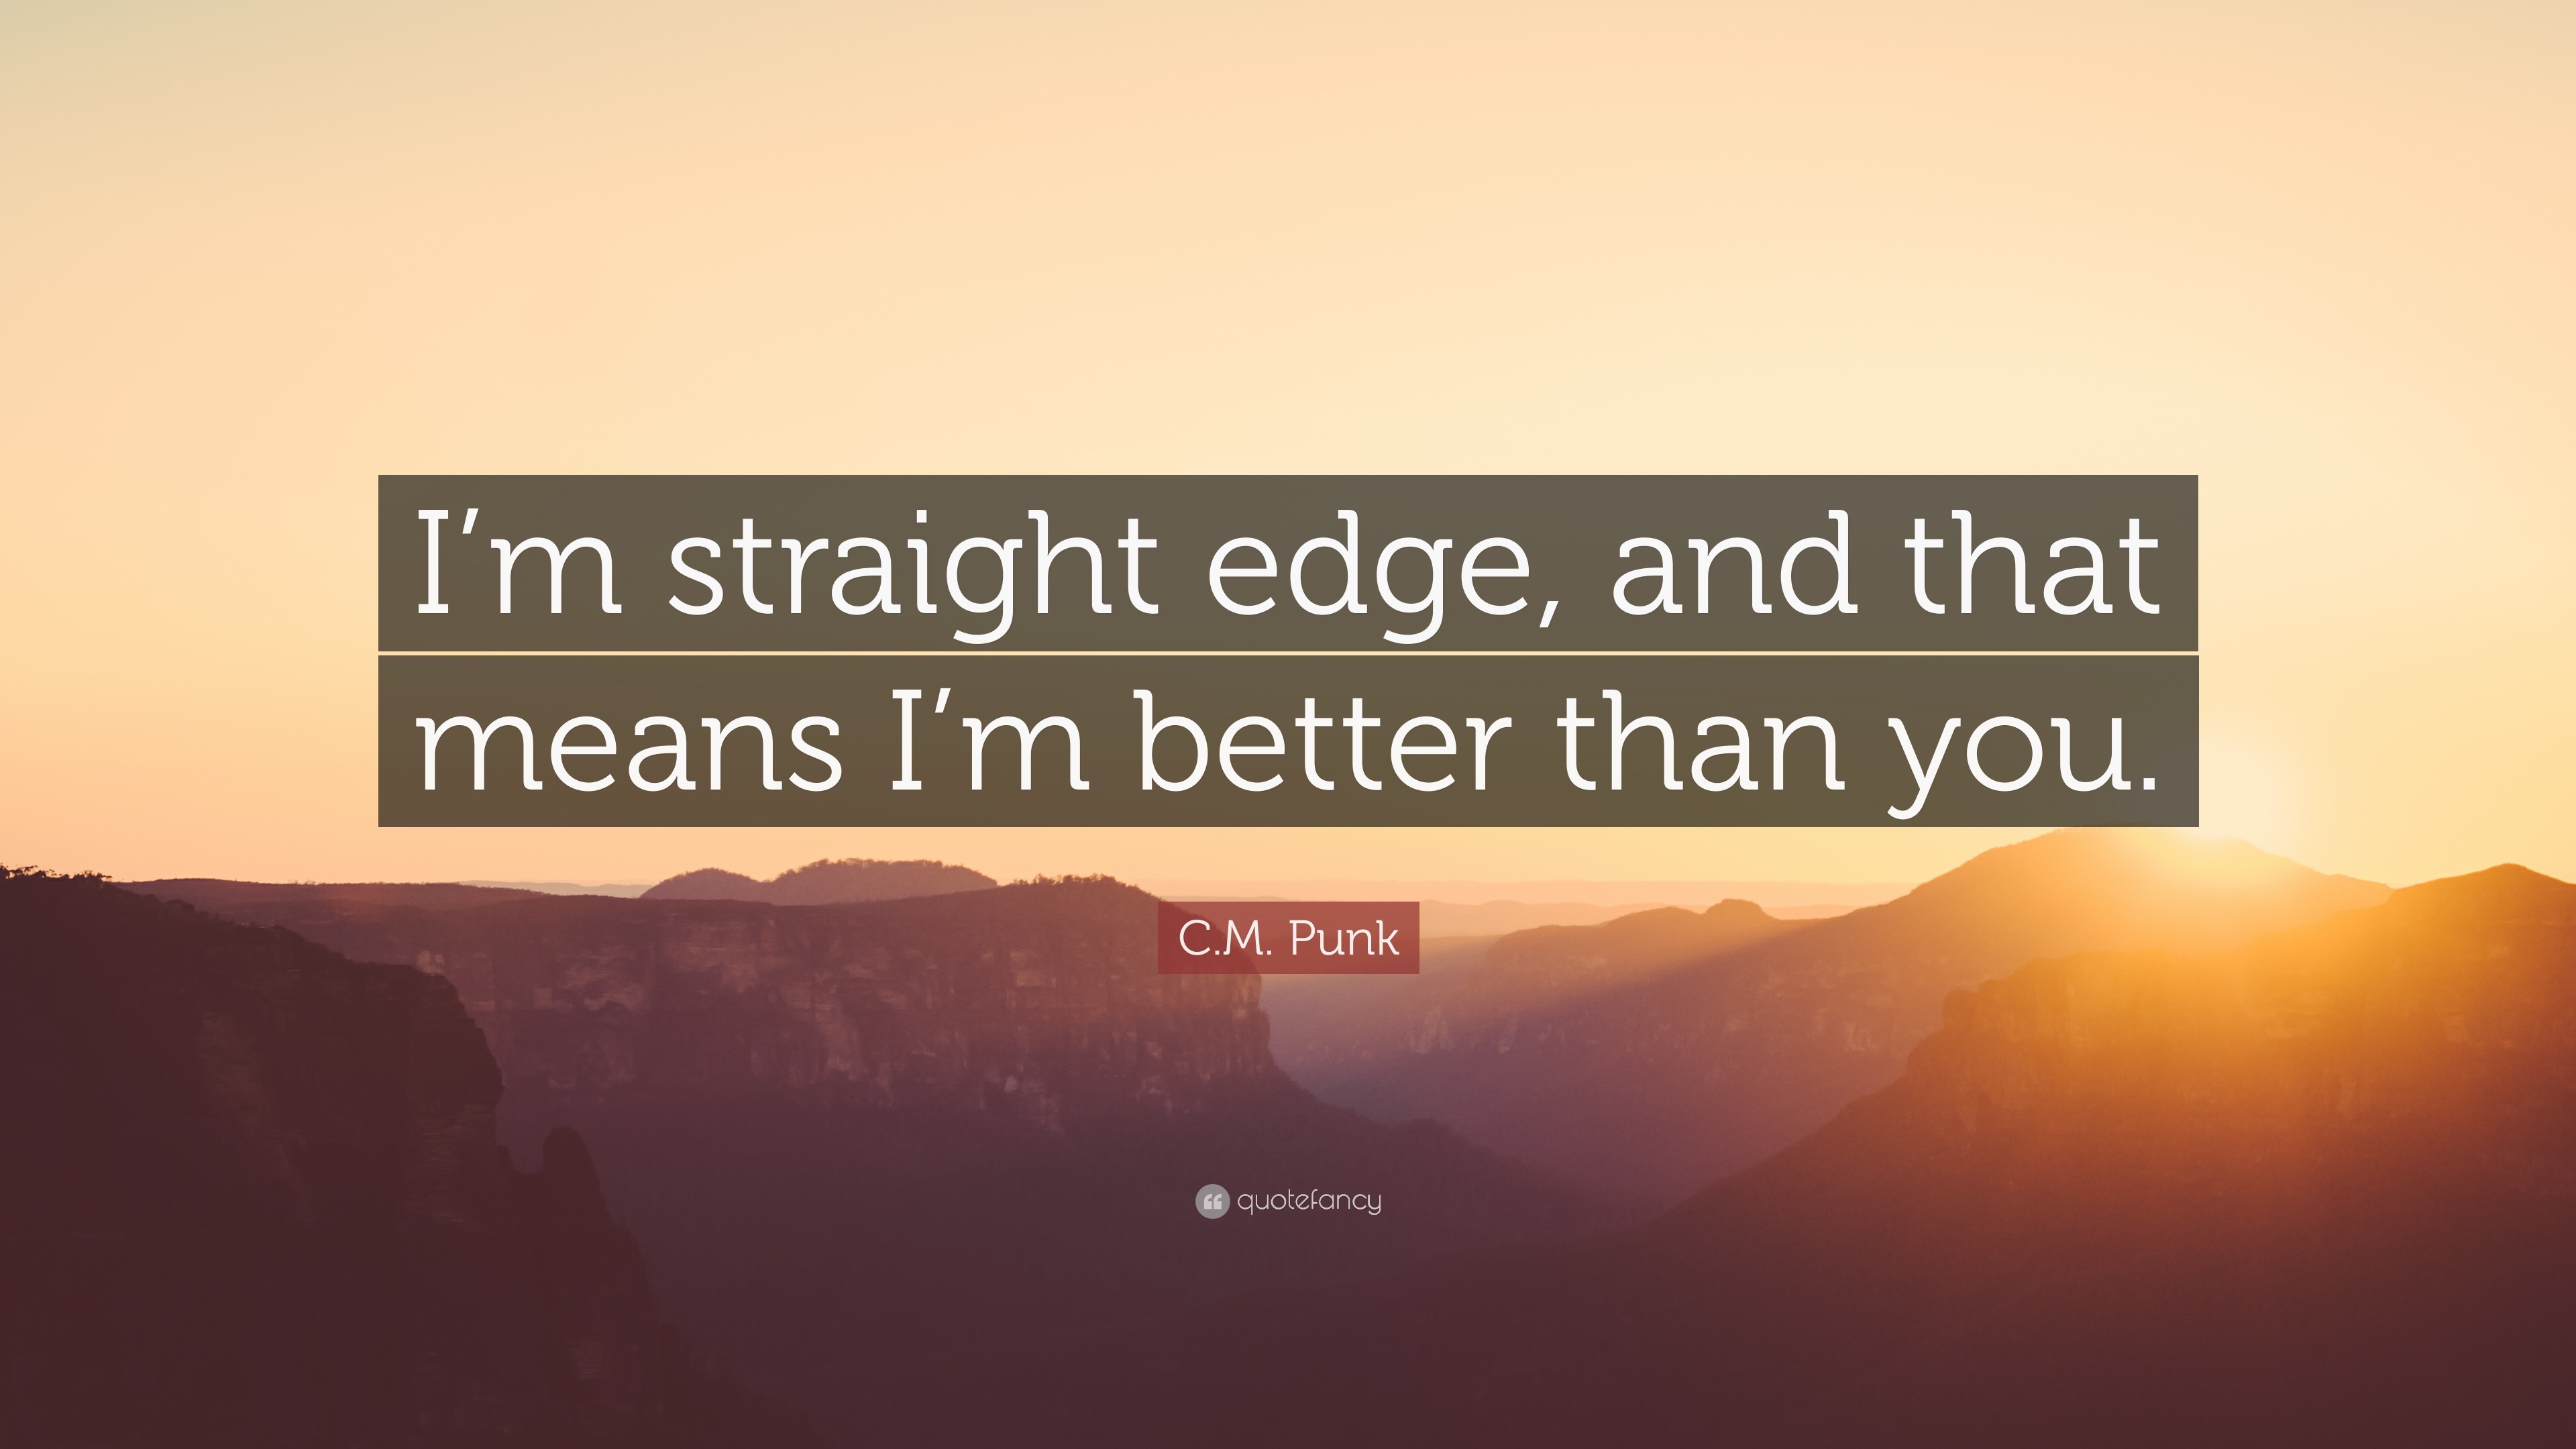 3840x2160 C.M. Punk Quote: “I'm straight edge, and that means I'